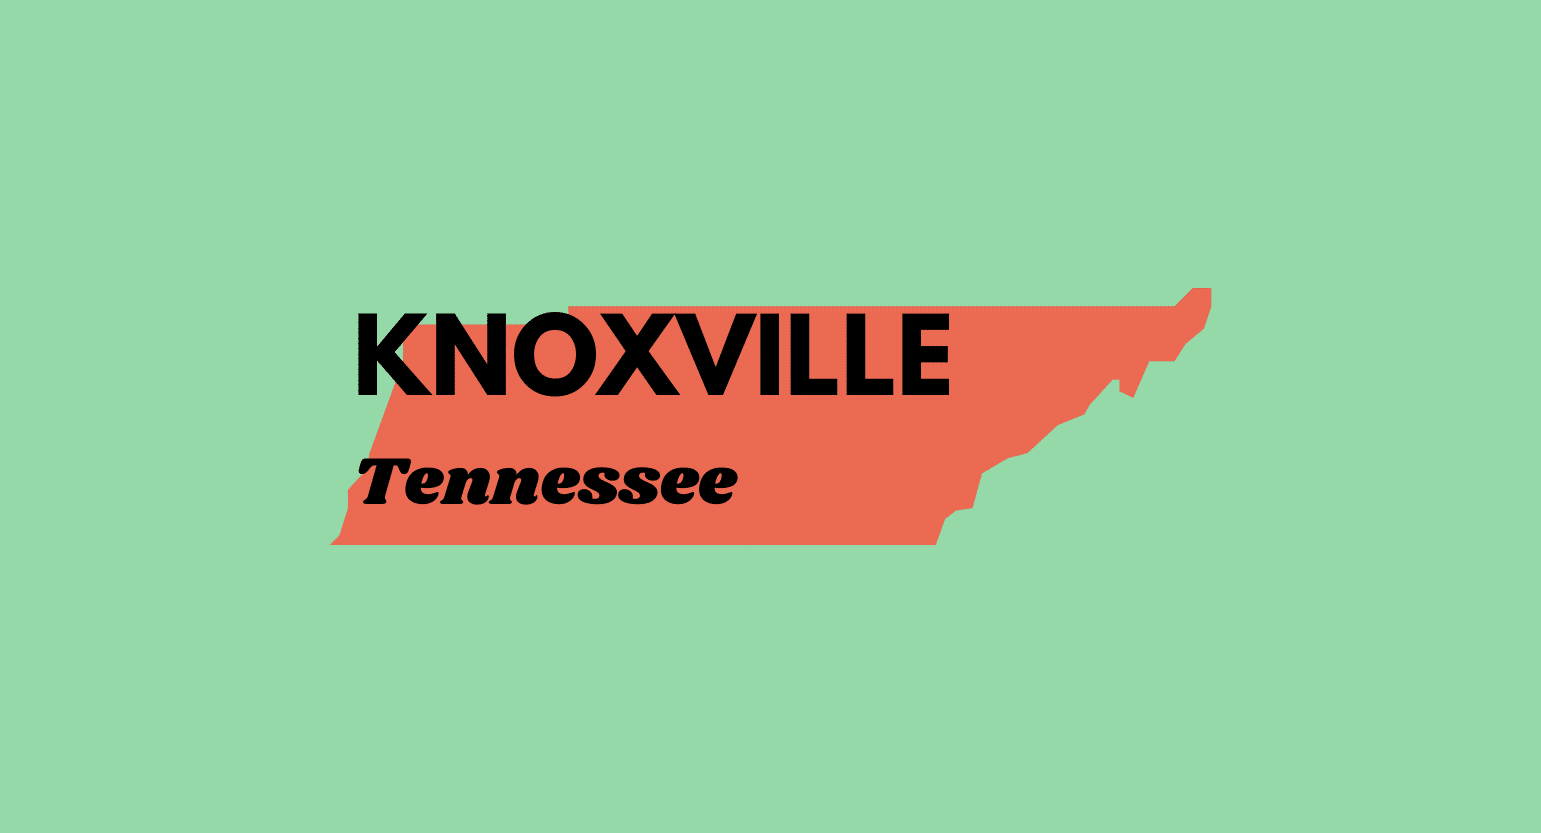 Is Kratom Legal in Knoxville?